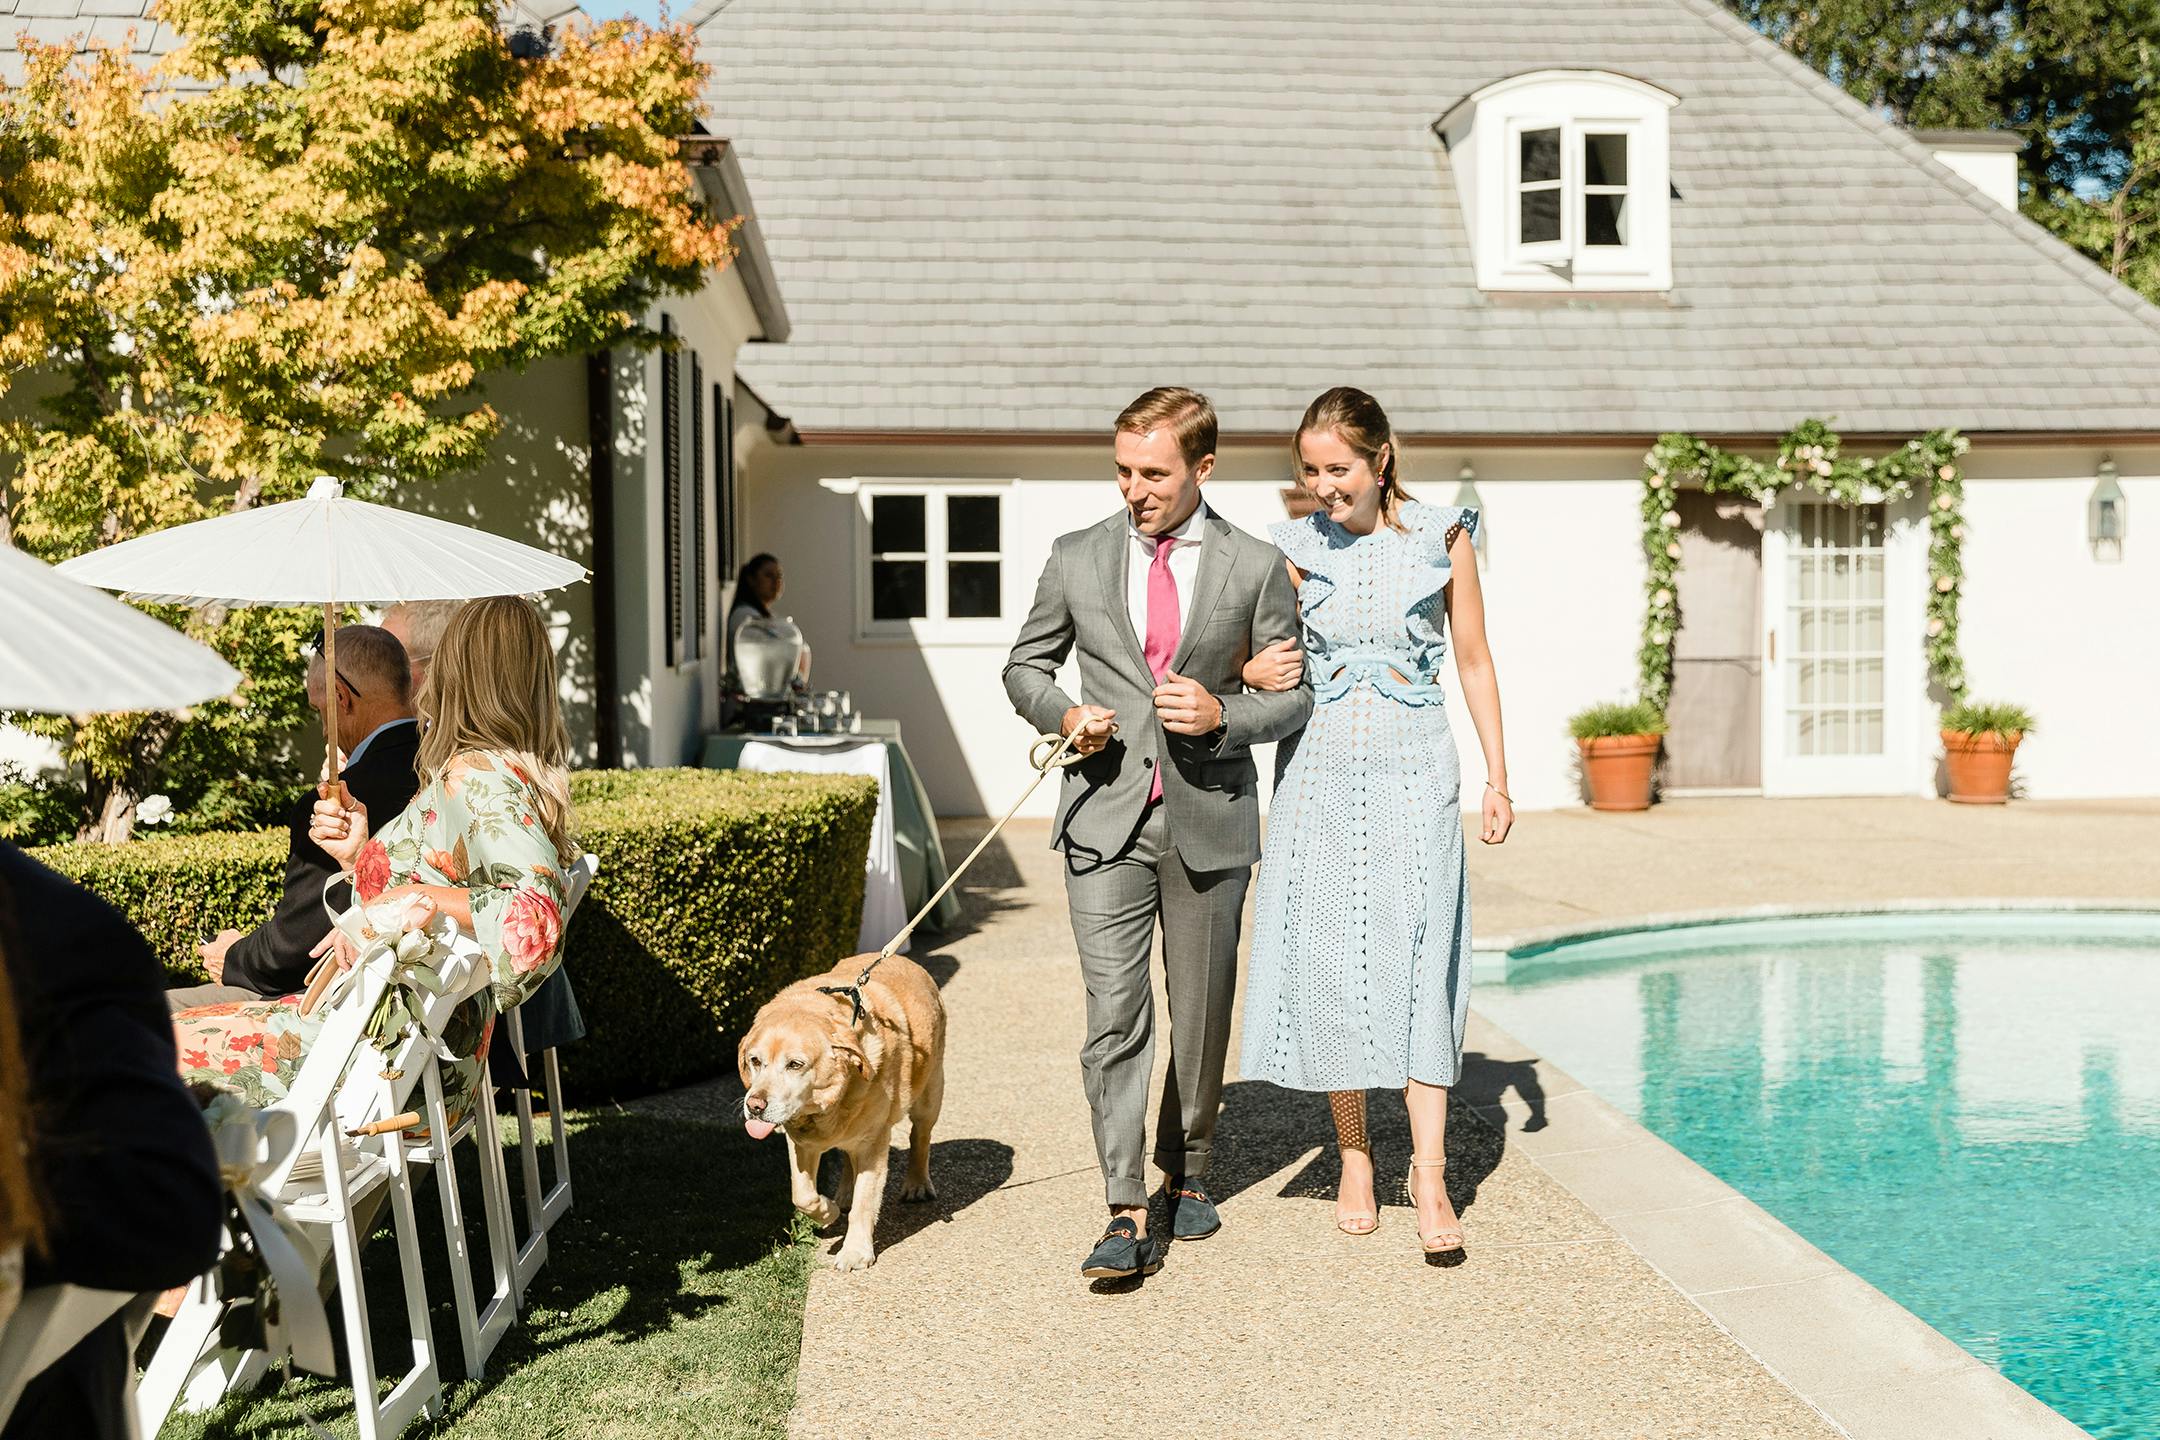 Beautiful Backyard Wedding at a Private Residence in California